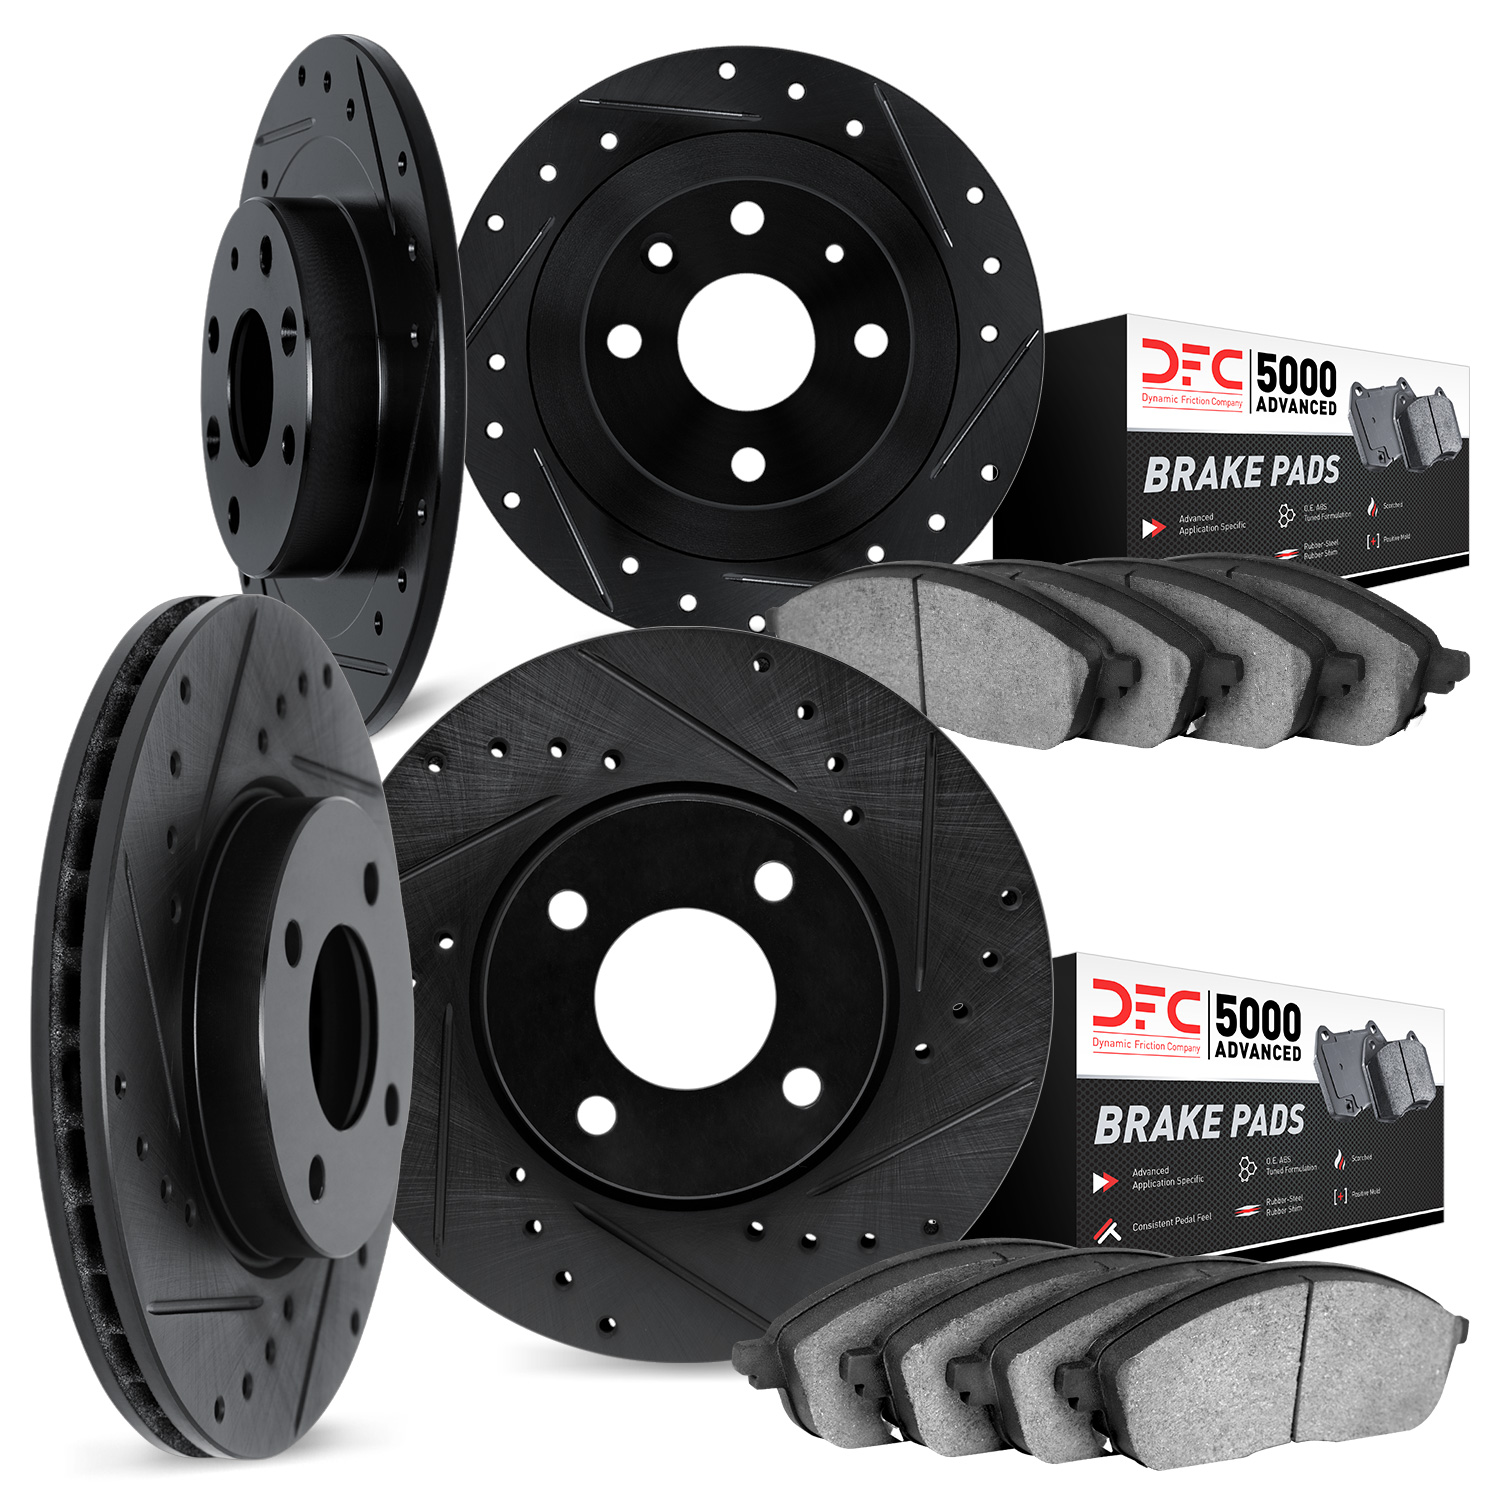 8504-53009 Drilled/Slotted Brake Rotors w/5000 Advanced Brake Pads Kit [Black], 1991-1996 GM, Position: Front and Rear